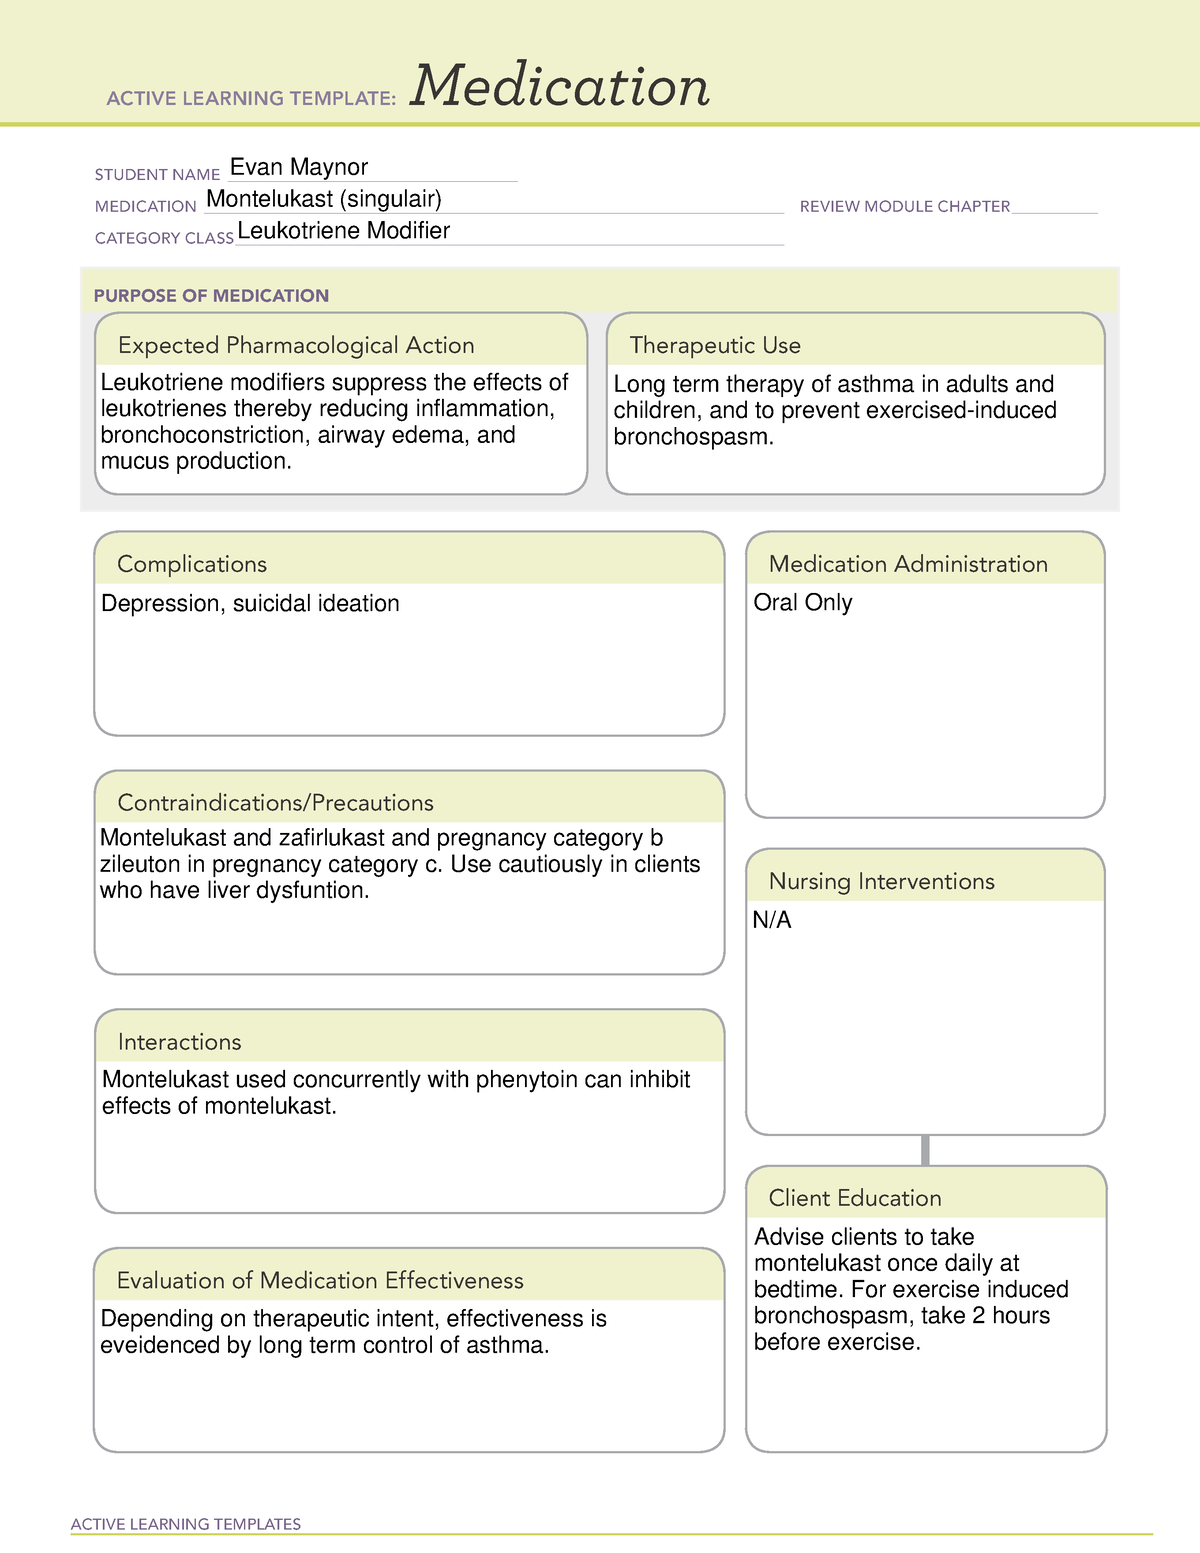 montelukast-med-sheet-active-learning-templates-medication-student